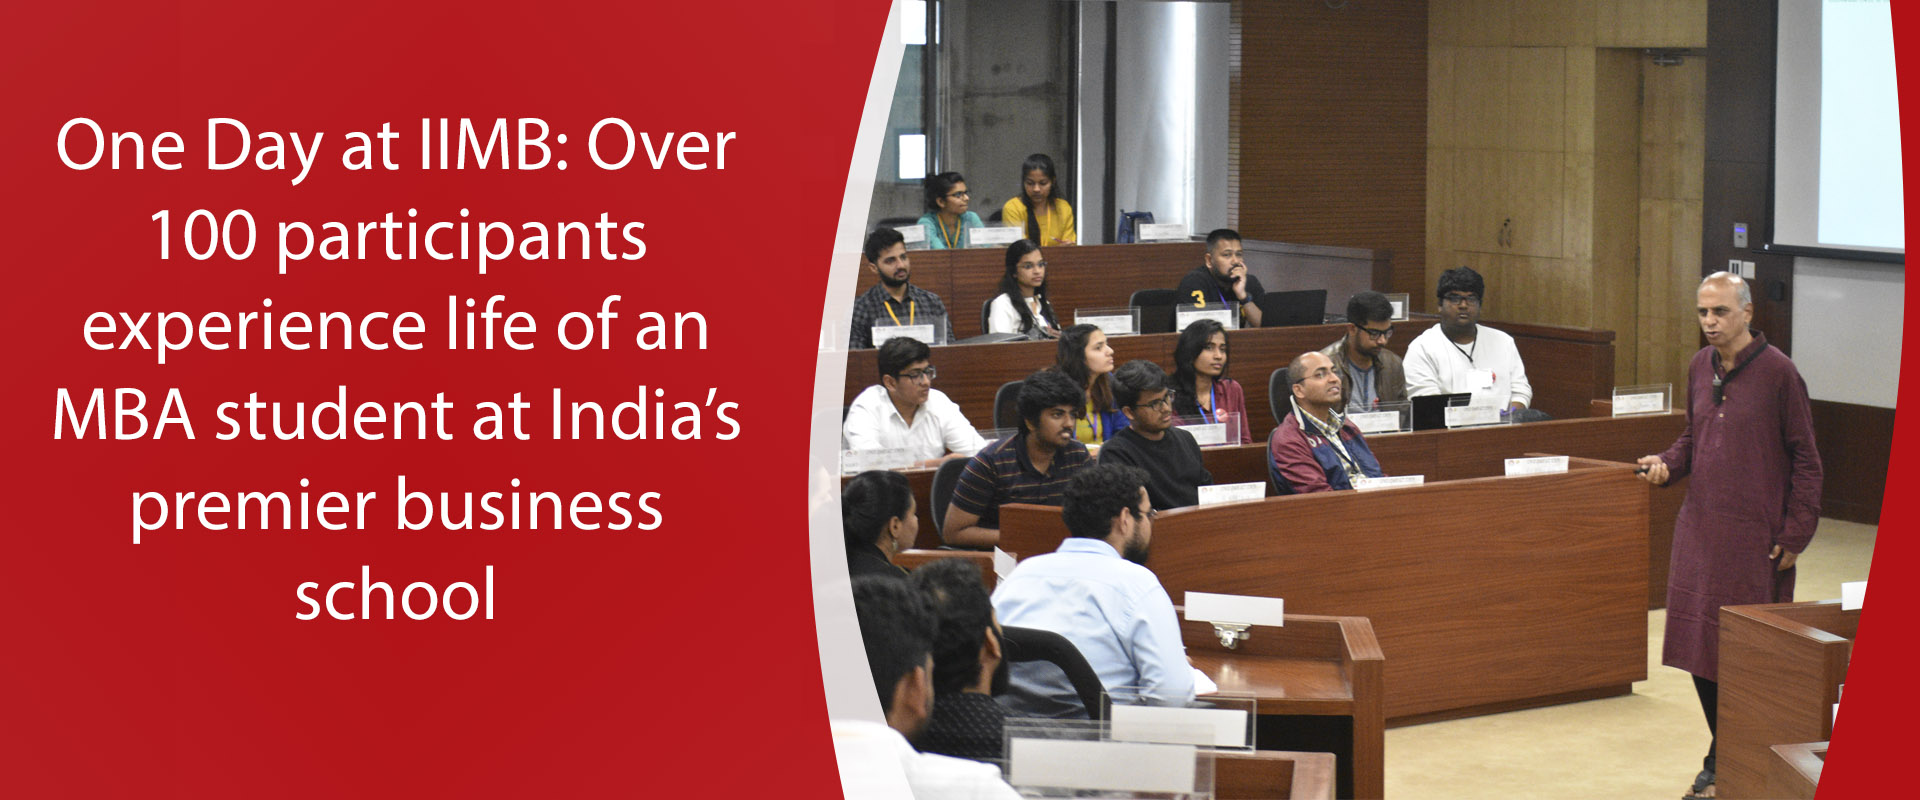 One Day at IIMB: Over 100 participants experience life of an MBA student at India’s premier business school